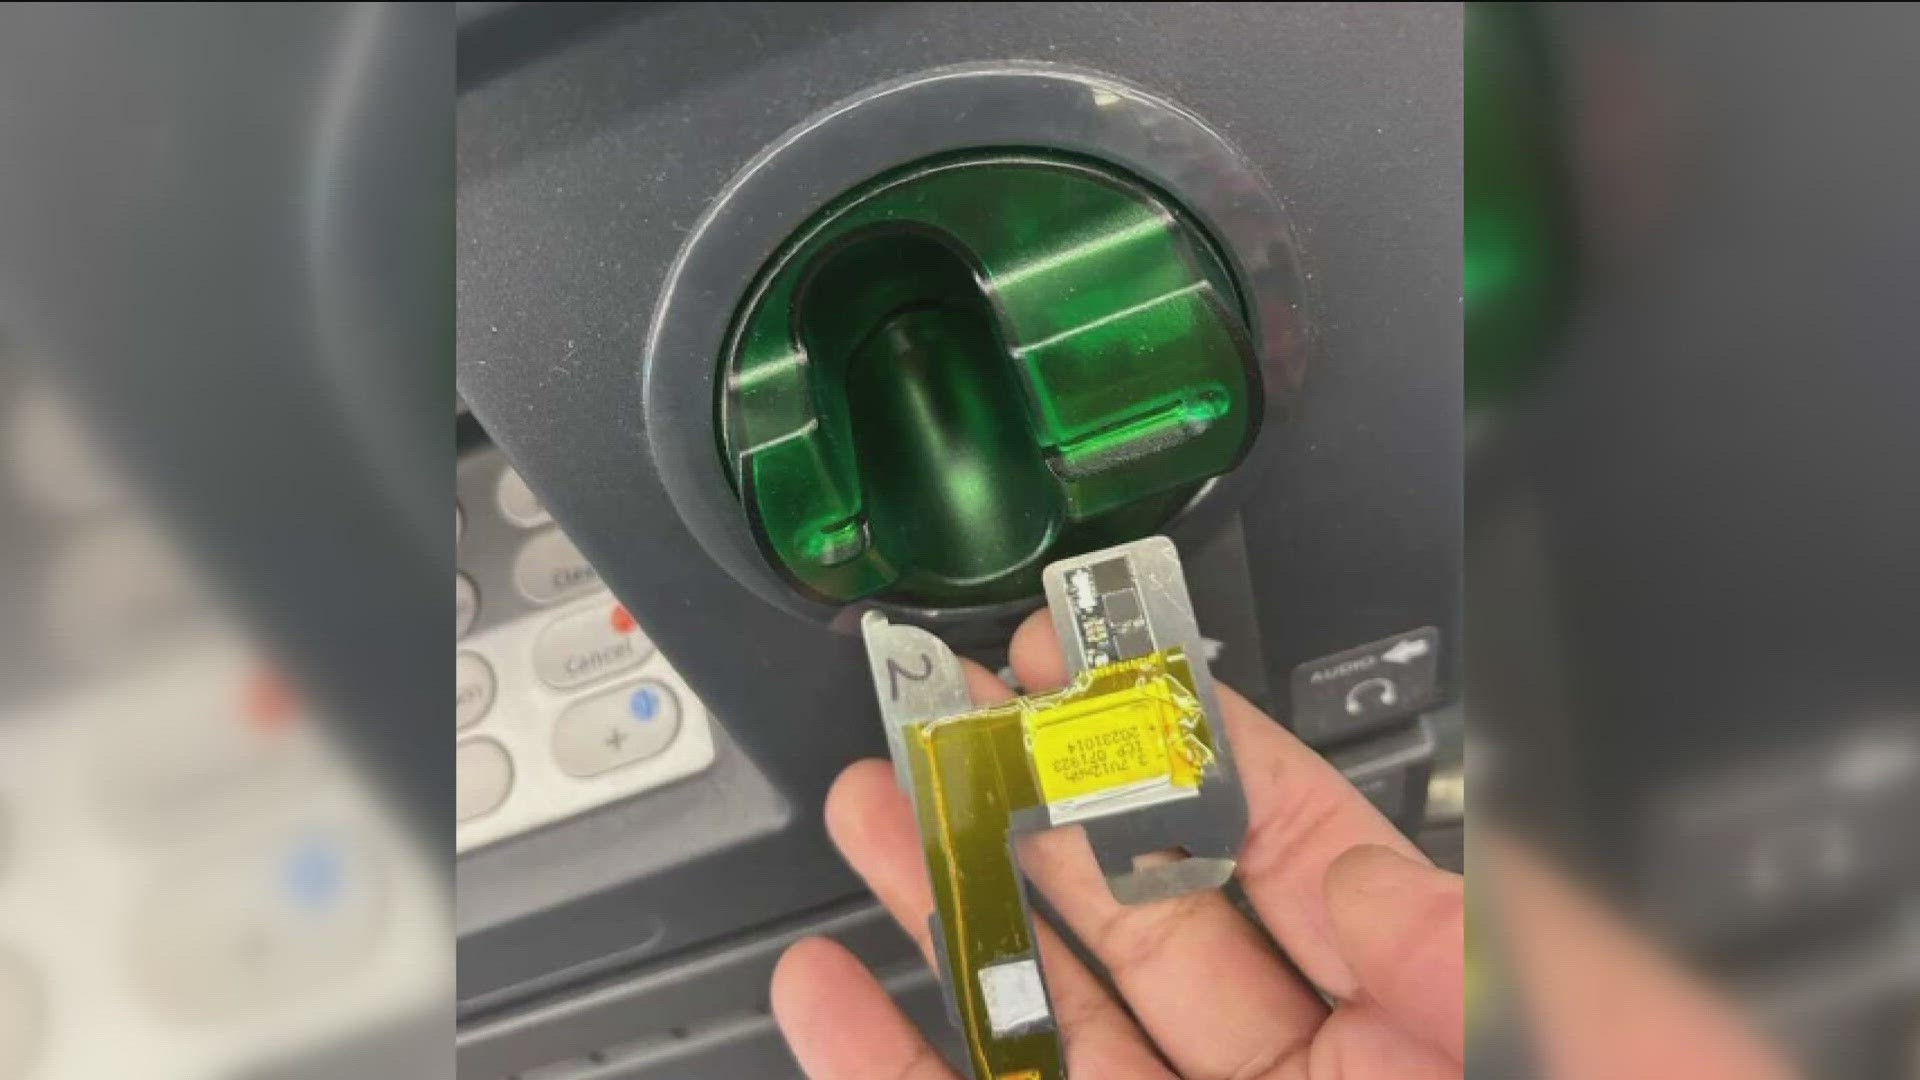 A couple of weeks ago the El Cajon Police Department warned of a rise in card skimmers.